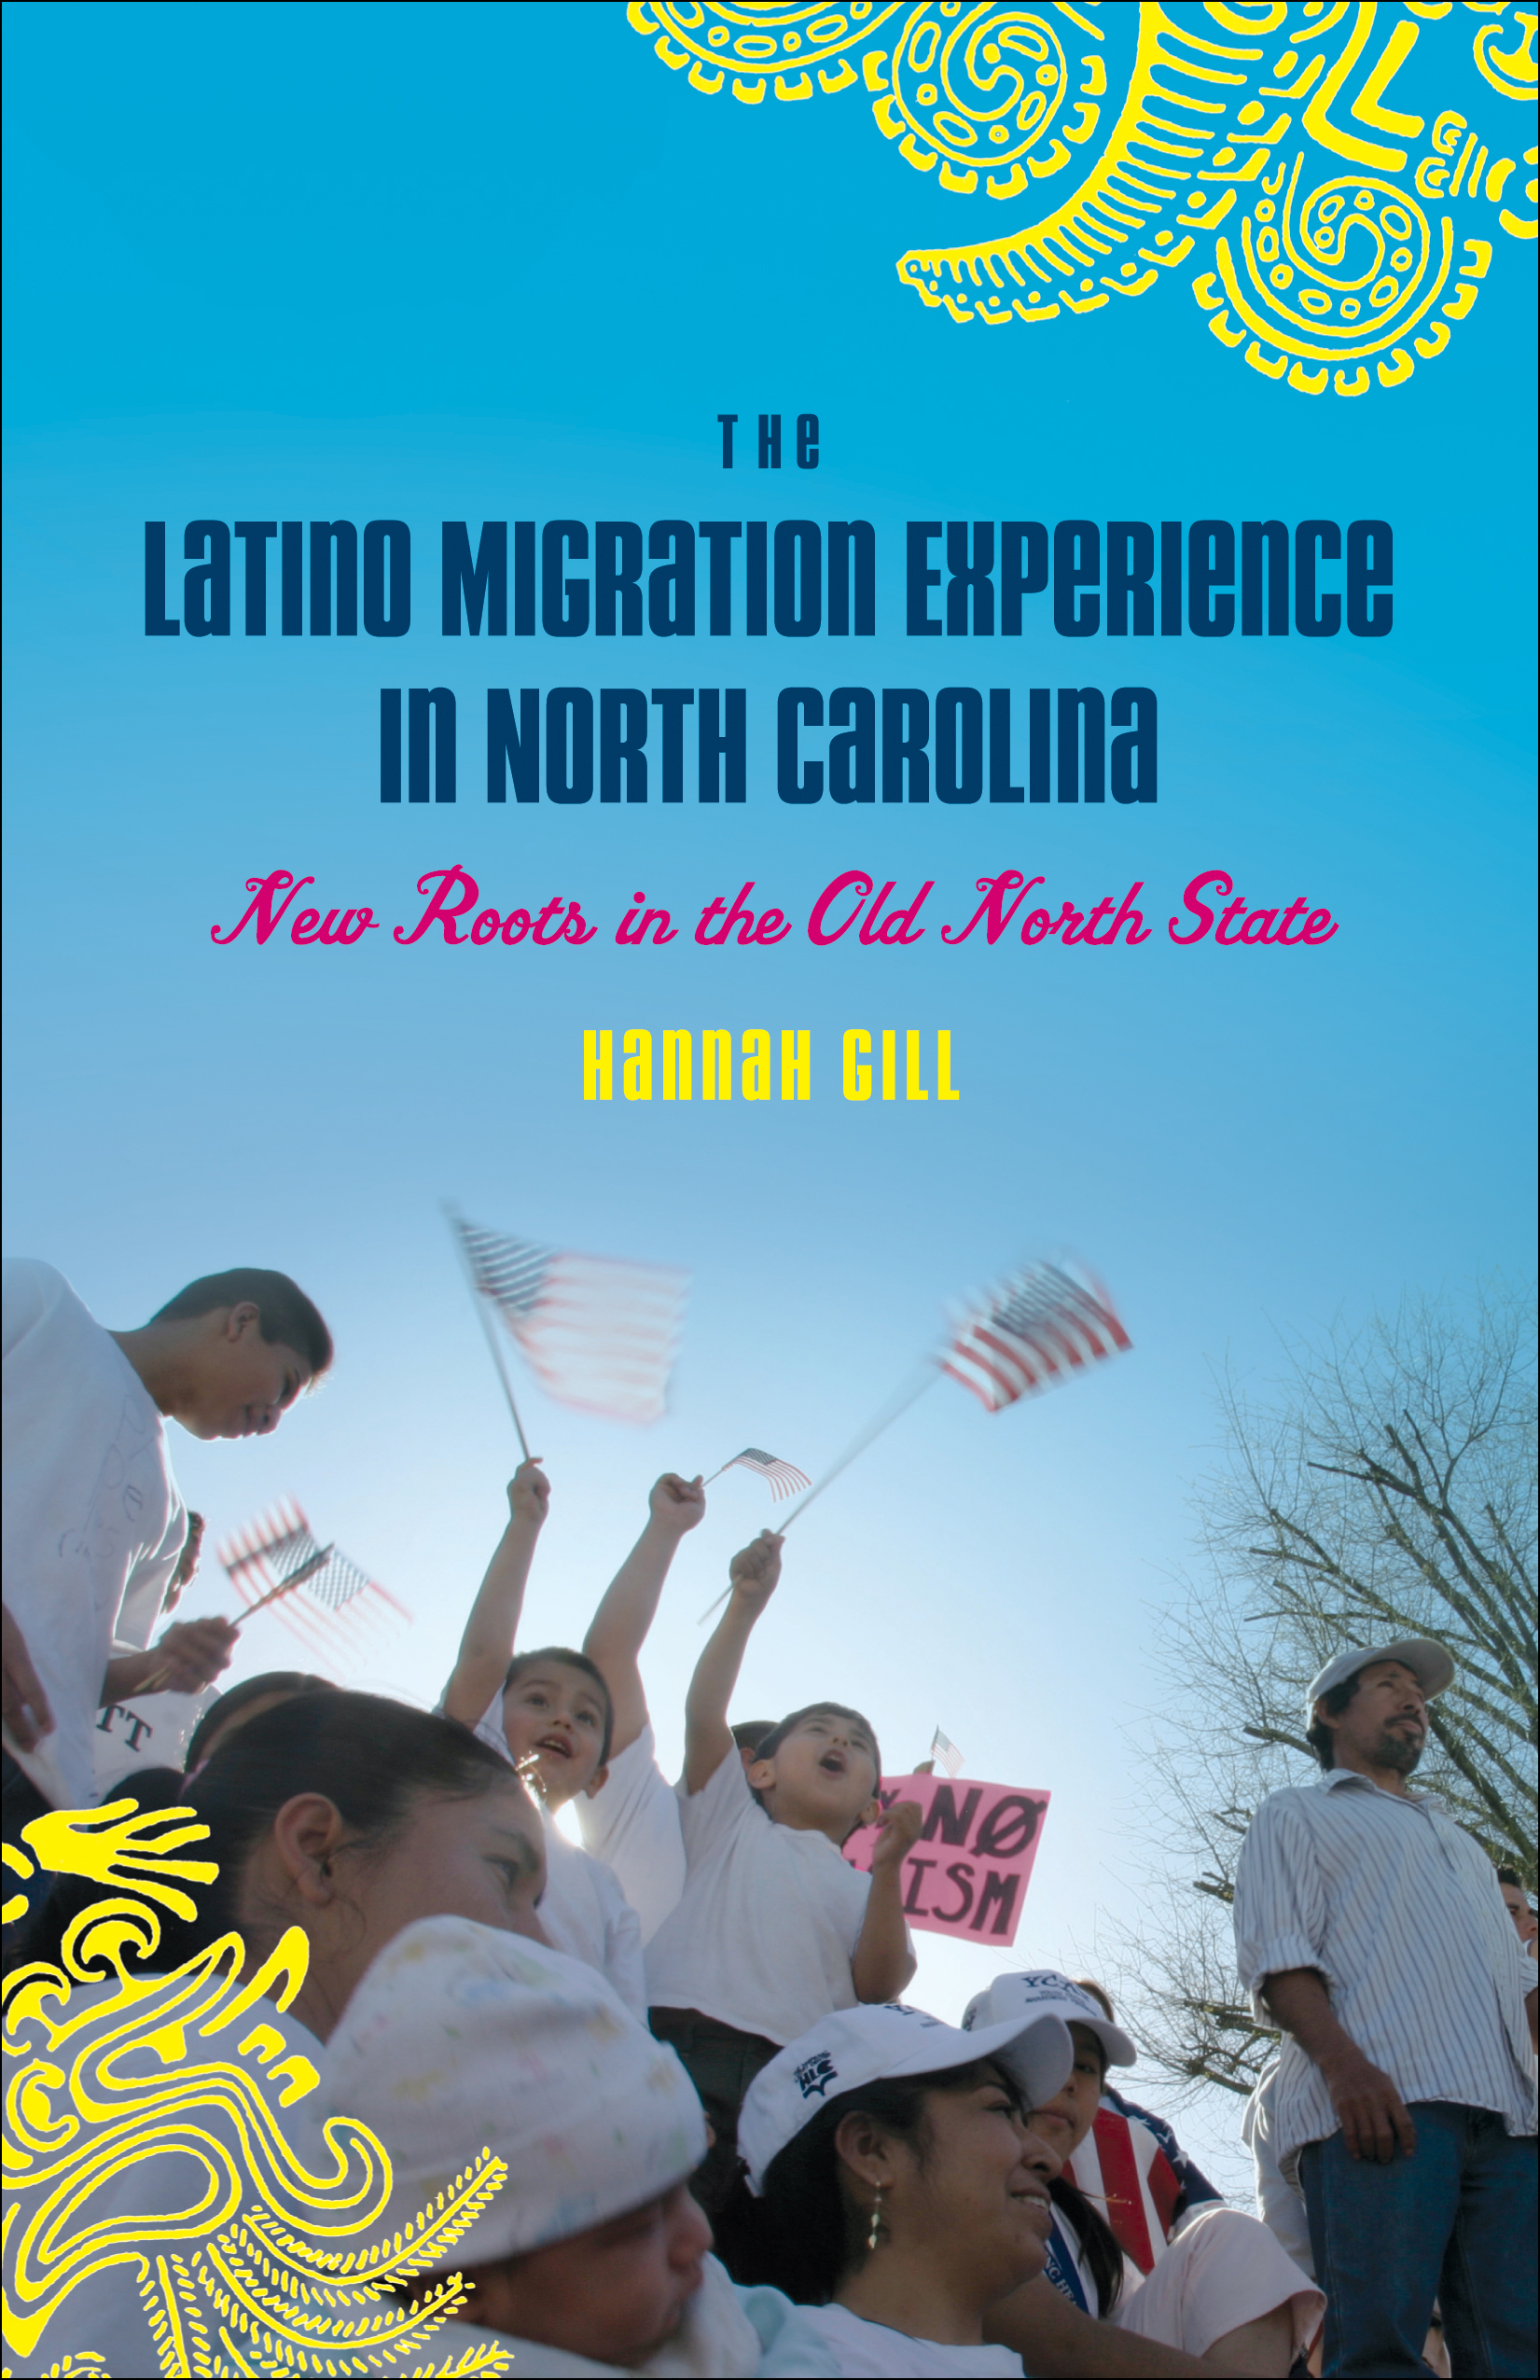 Gill's book addresses the Latino migration experience in North Carolina.